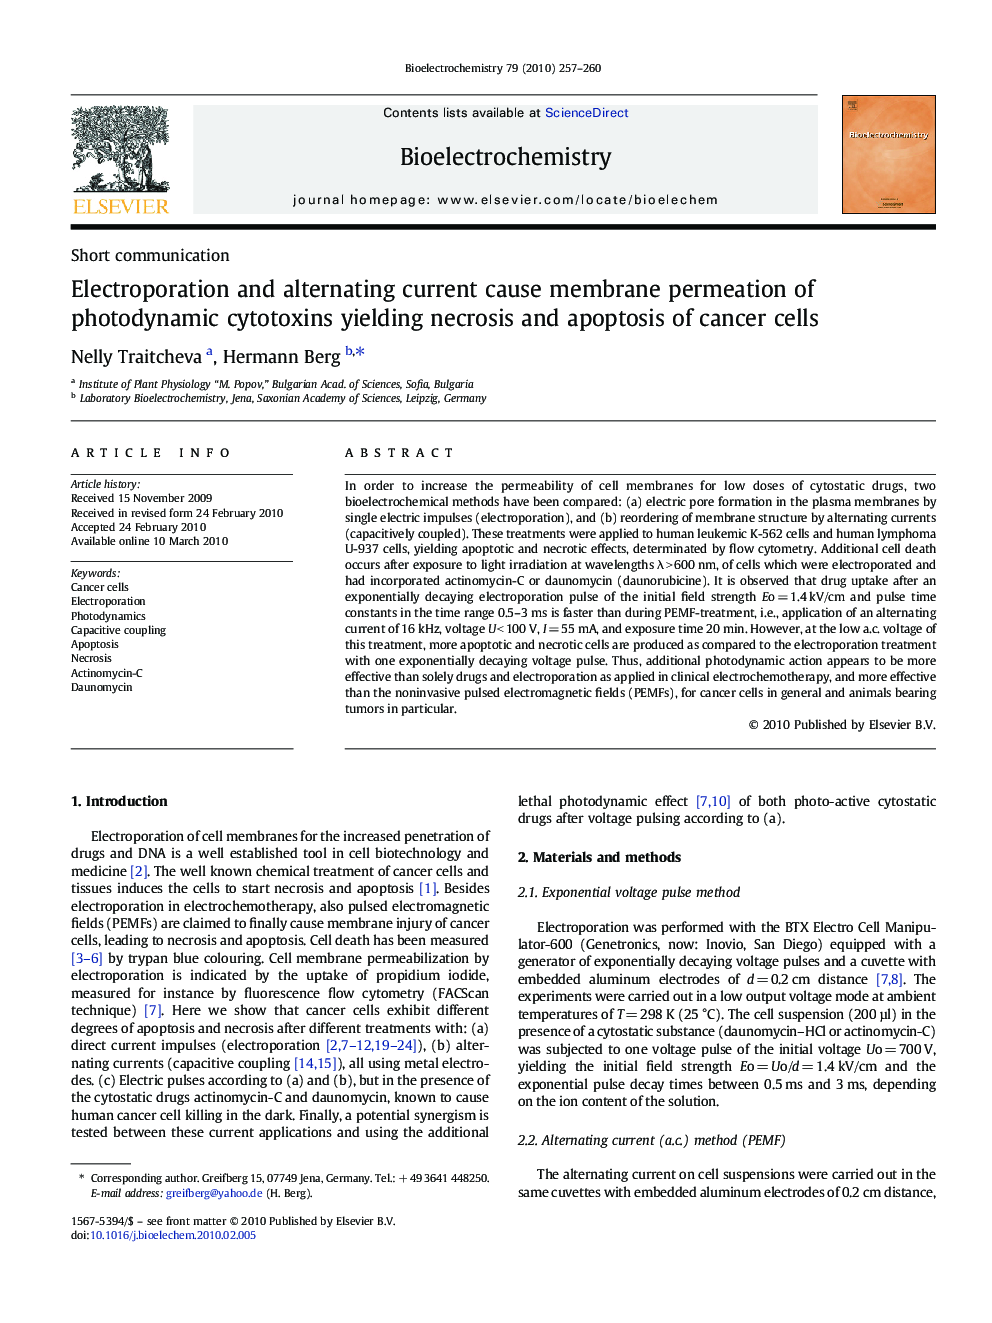 Electroporation and alternating current cause membrane permeation of photodynamic cytotoxins yielding necrosis and apoptosis of cancer cells